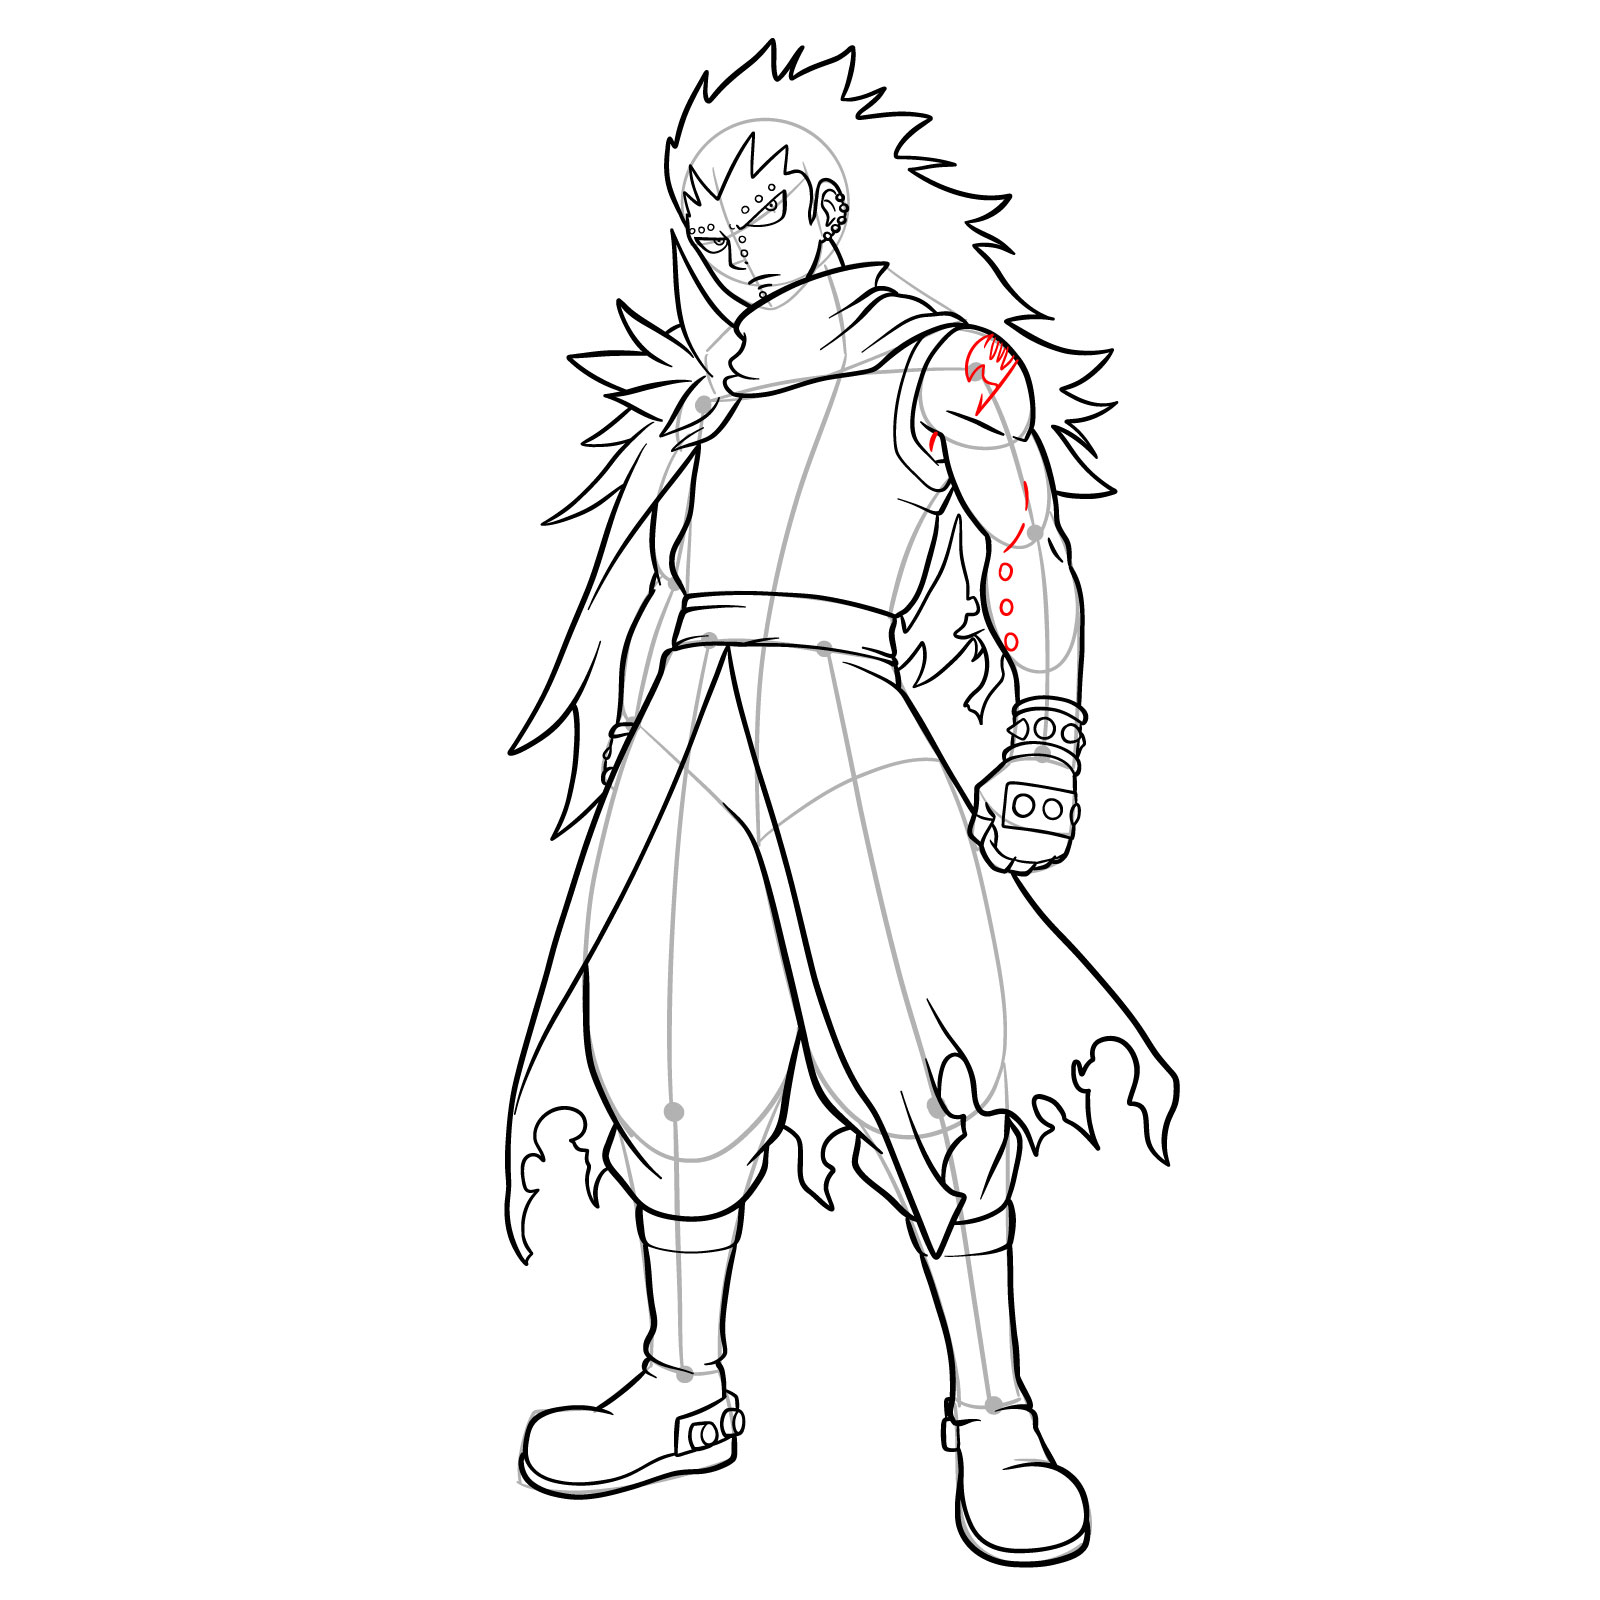 How to draw Gajeel Redfox from Fairy Tail - step 38